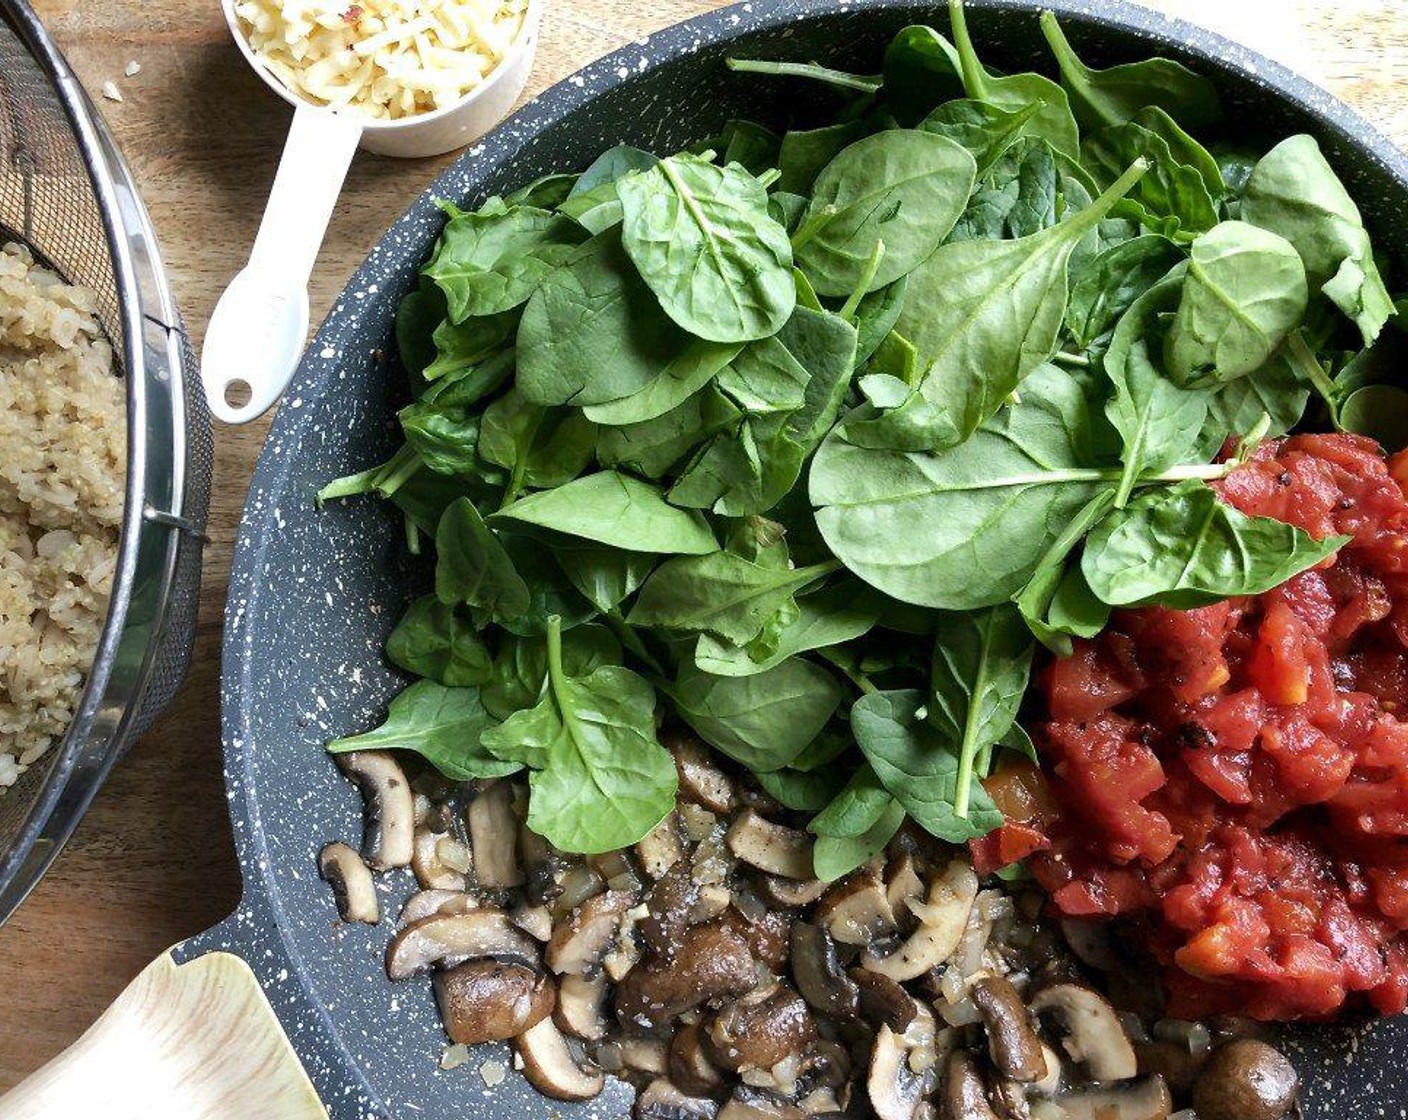 step 5 Add Mushrooms (2 cups), cook and stir for 4-5 minutes or until tender. Stir in Diced Tomatoes (1 can), Fresh Baby Spinach (4 cups), Salt (1/2 tsp), and Freshly Ground Black Pepper (1/4 tsp).